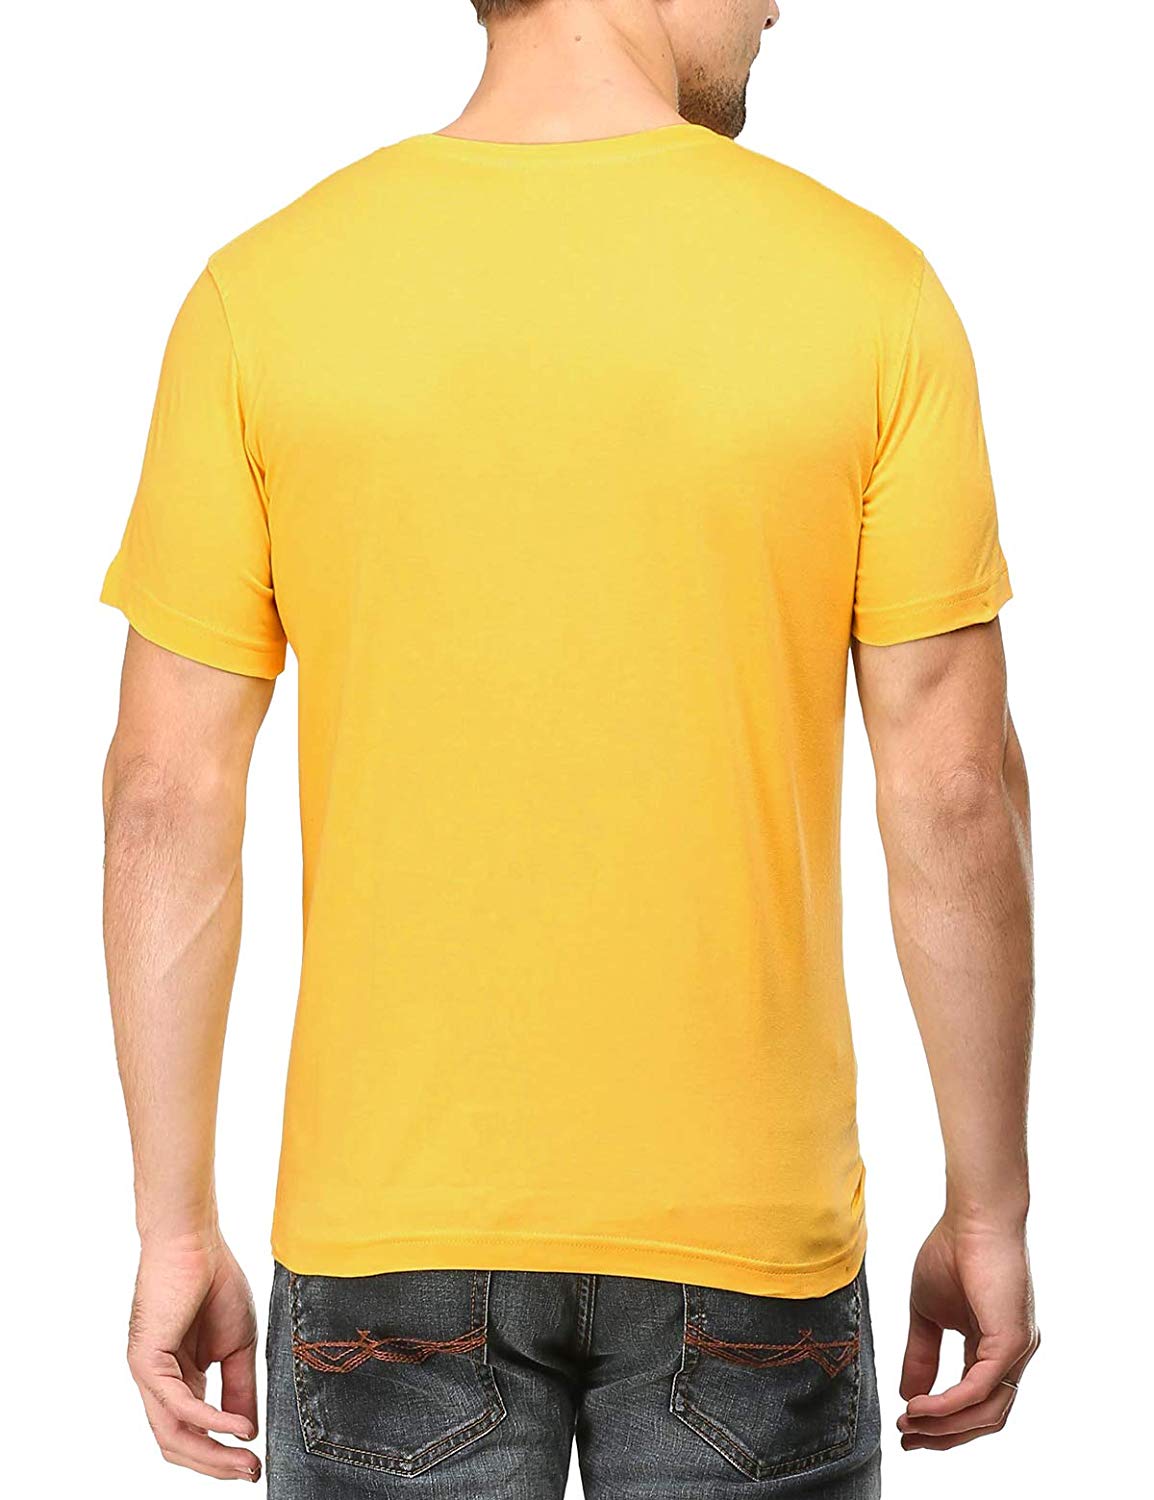 Swag Swami Men's  Cycle Smiley T-Shirt - Cyclop.in